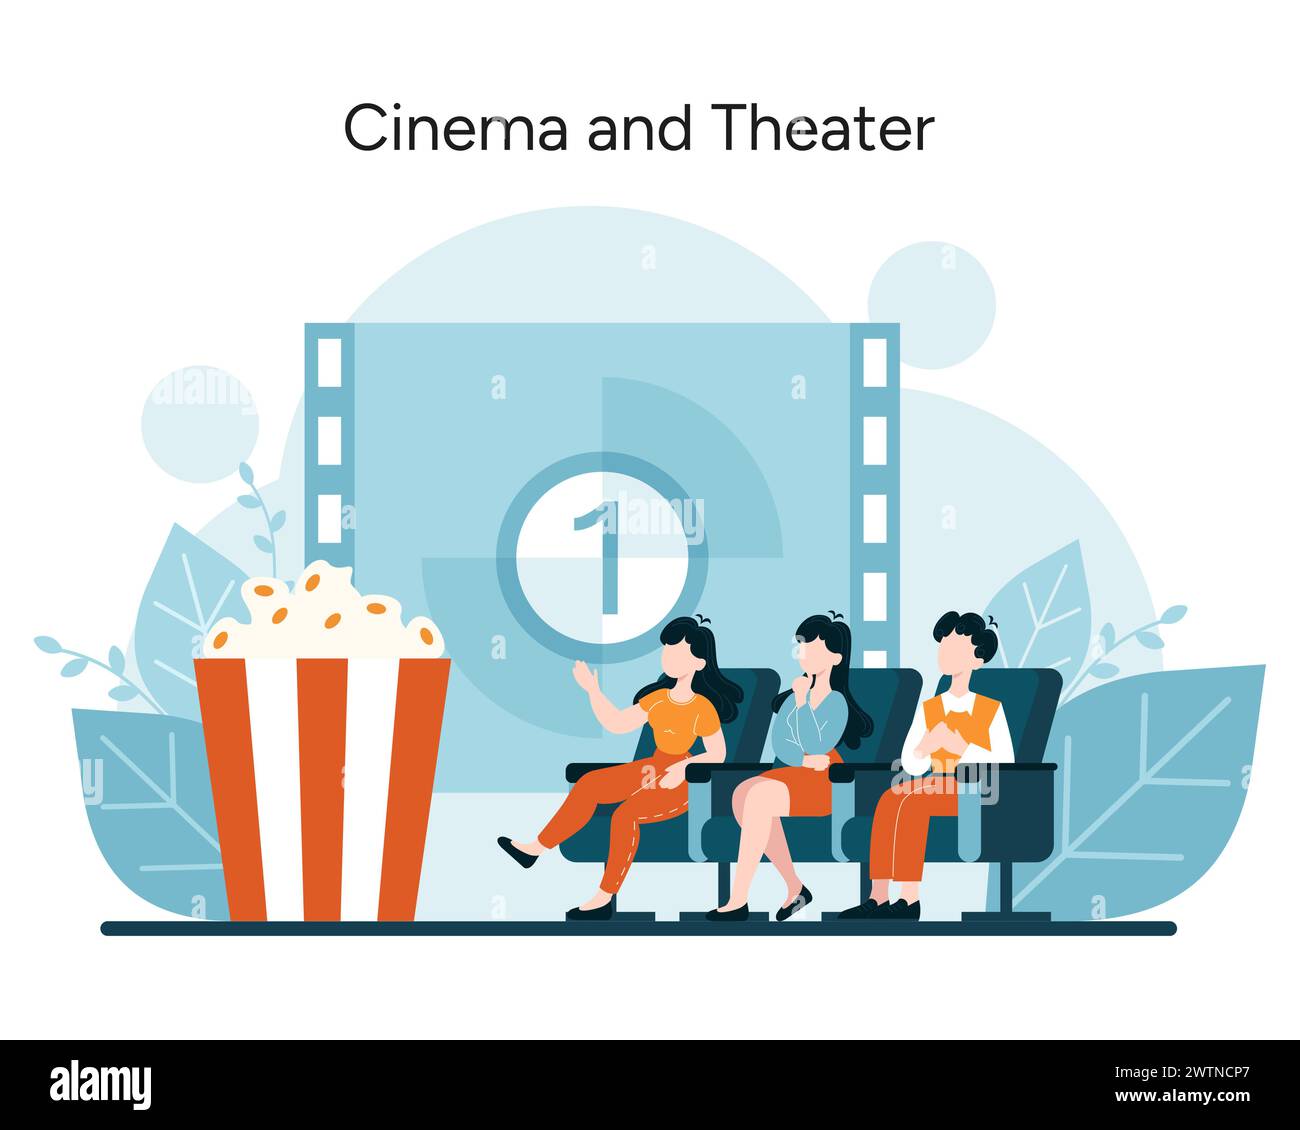 Cinematic Experience concept. Movie enthusiasts immerse in the magic of film. Enjoying the big screen in a theater setting with popcorn. Vector illustration Stock Vector